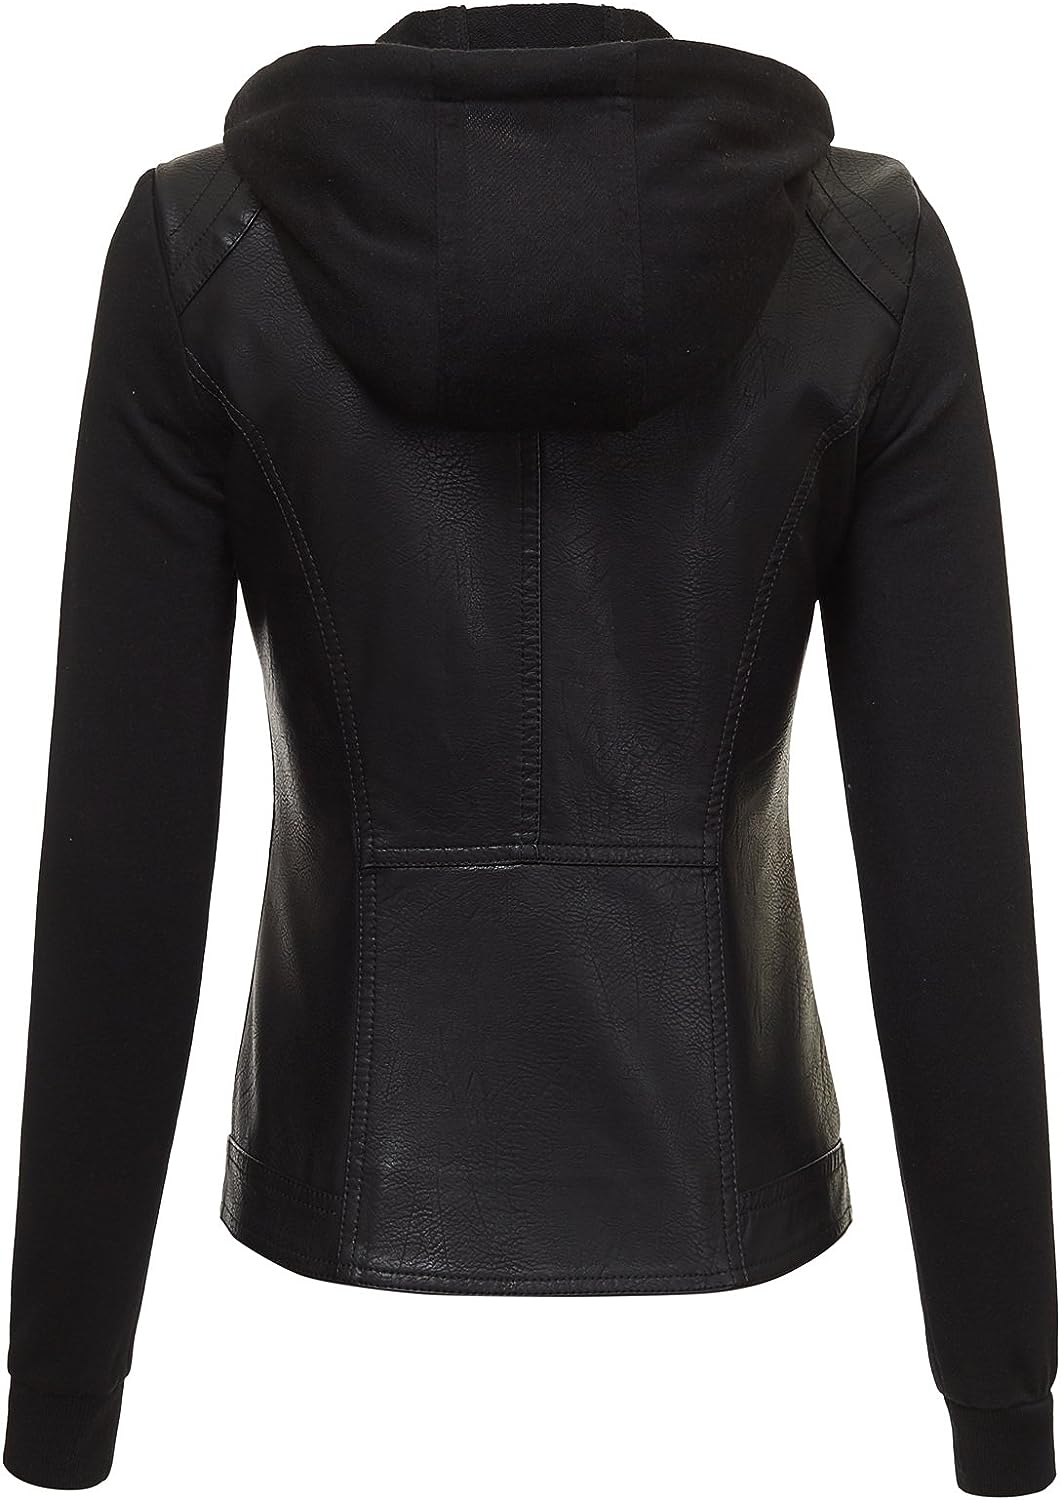 Women's Removable Hooded Black Leather Moto Jacket